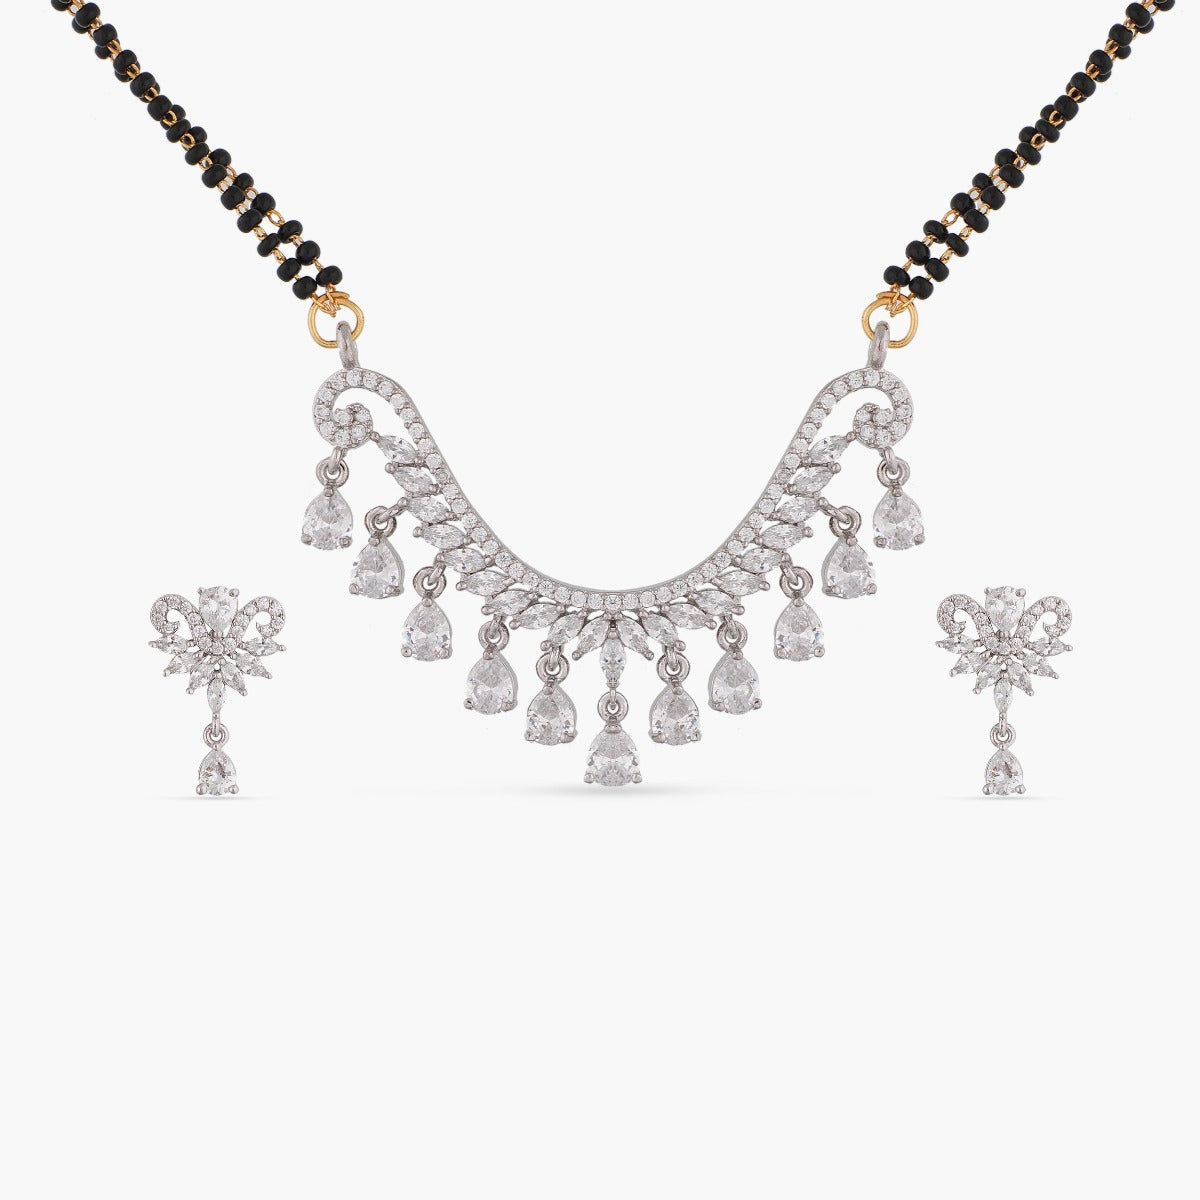 Black Crystal and Metal Beaded Three Layer Necklace with Earrings